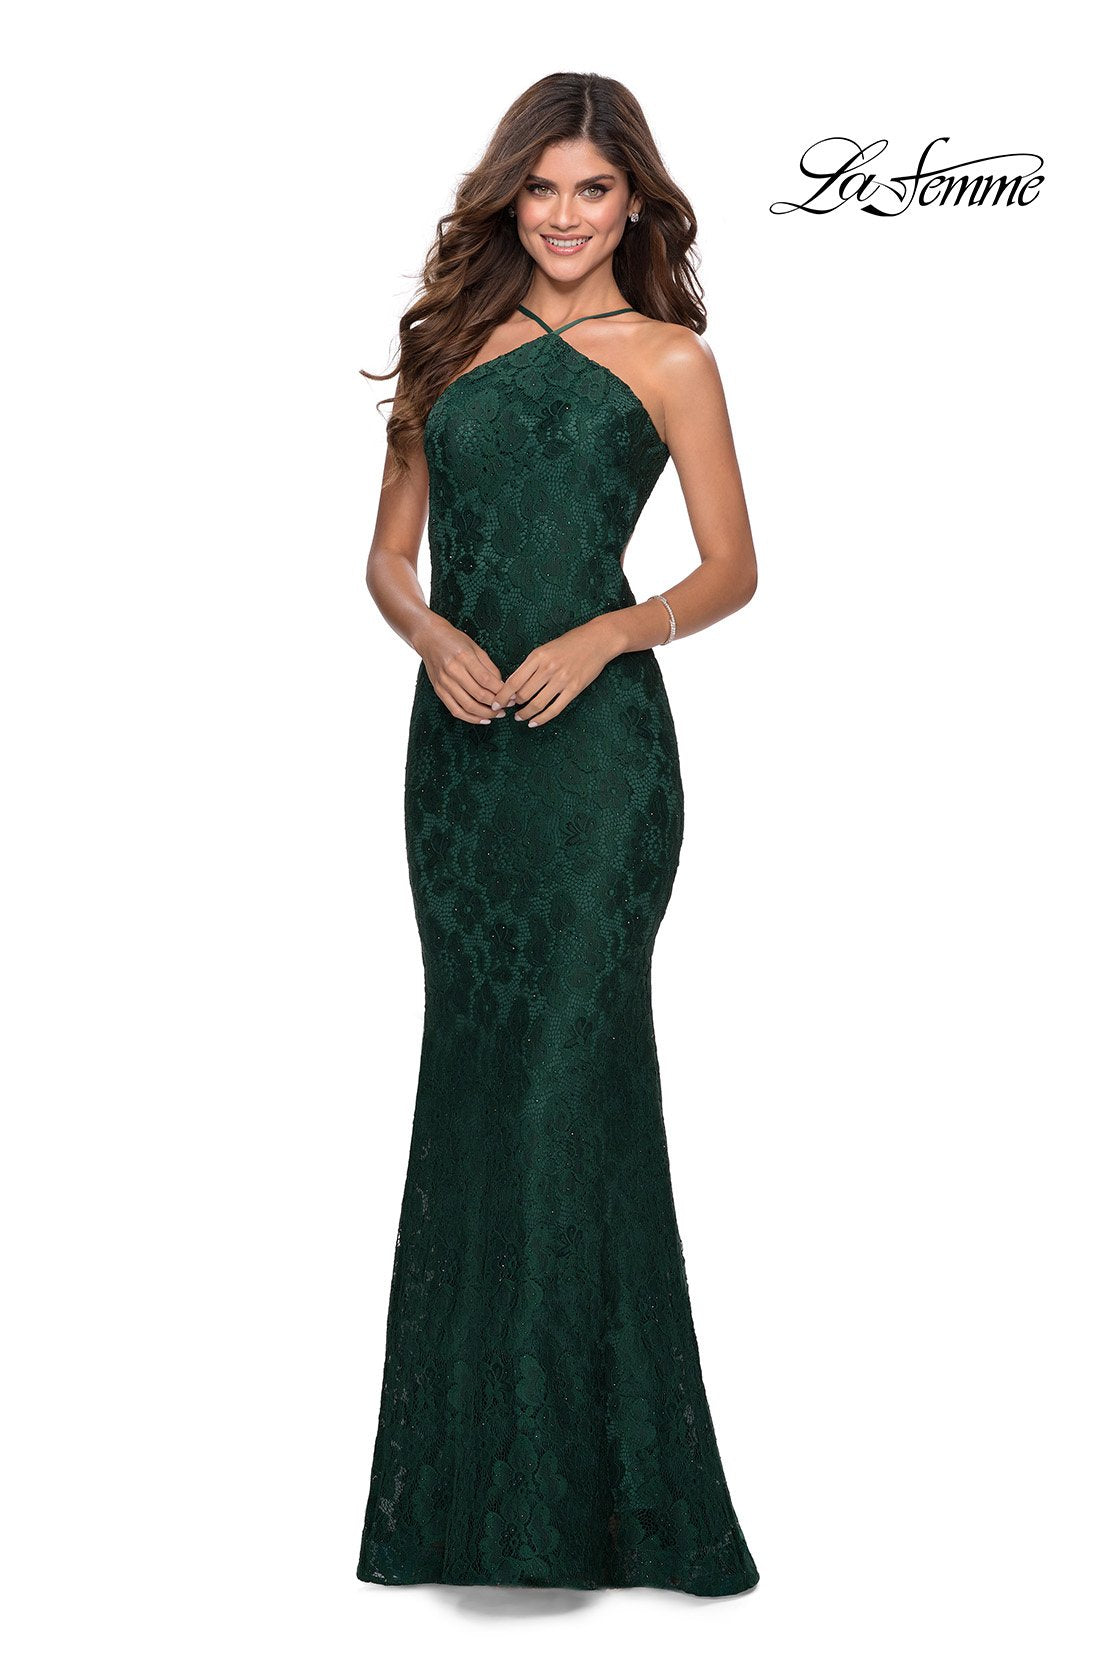 La Femme 28619 dress images in these colors: Emerald, Navy, Red.